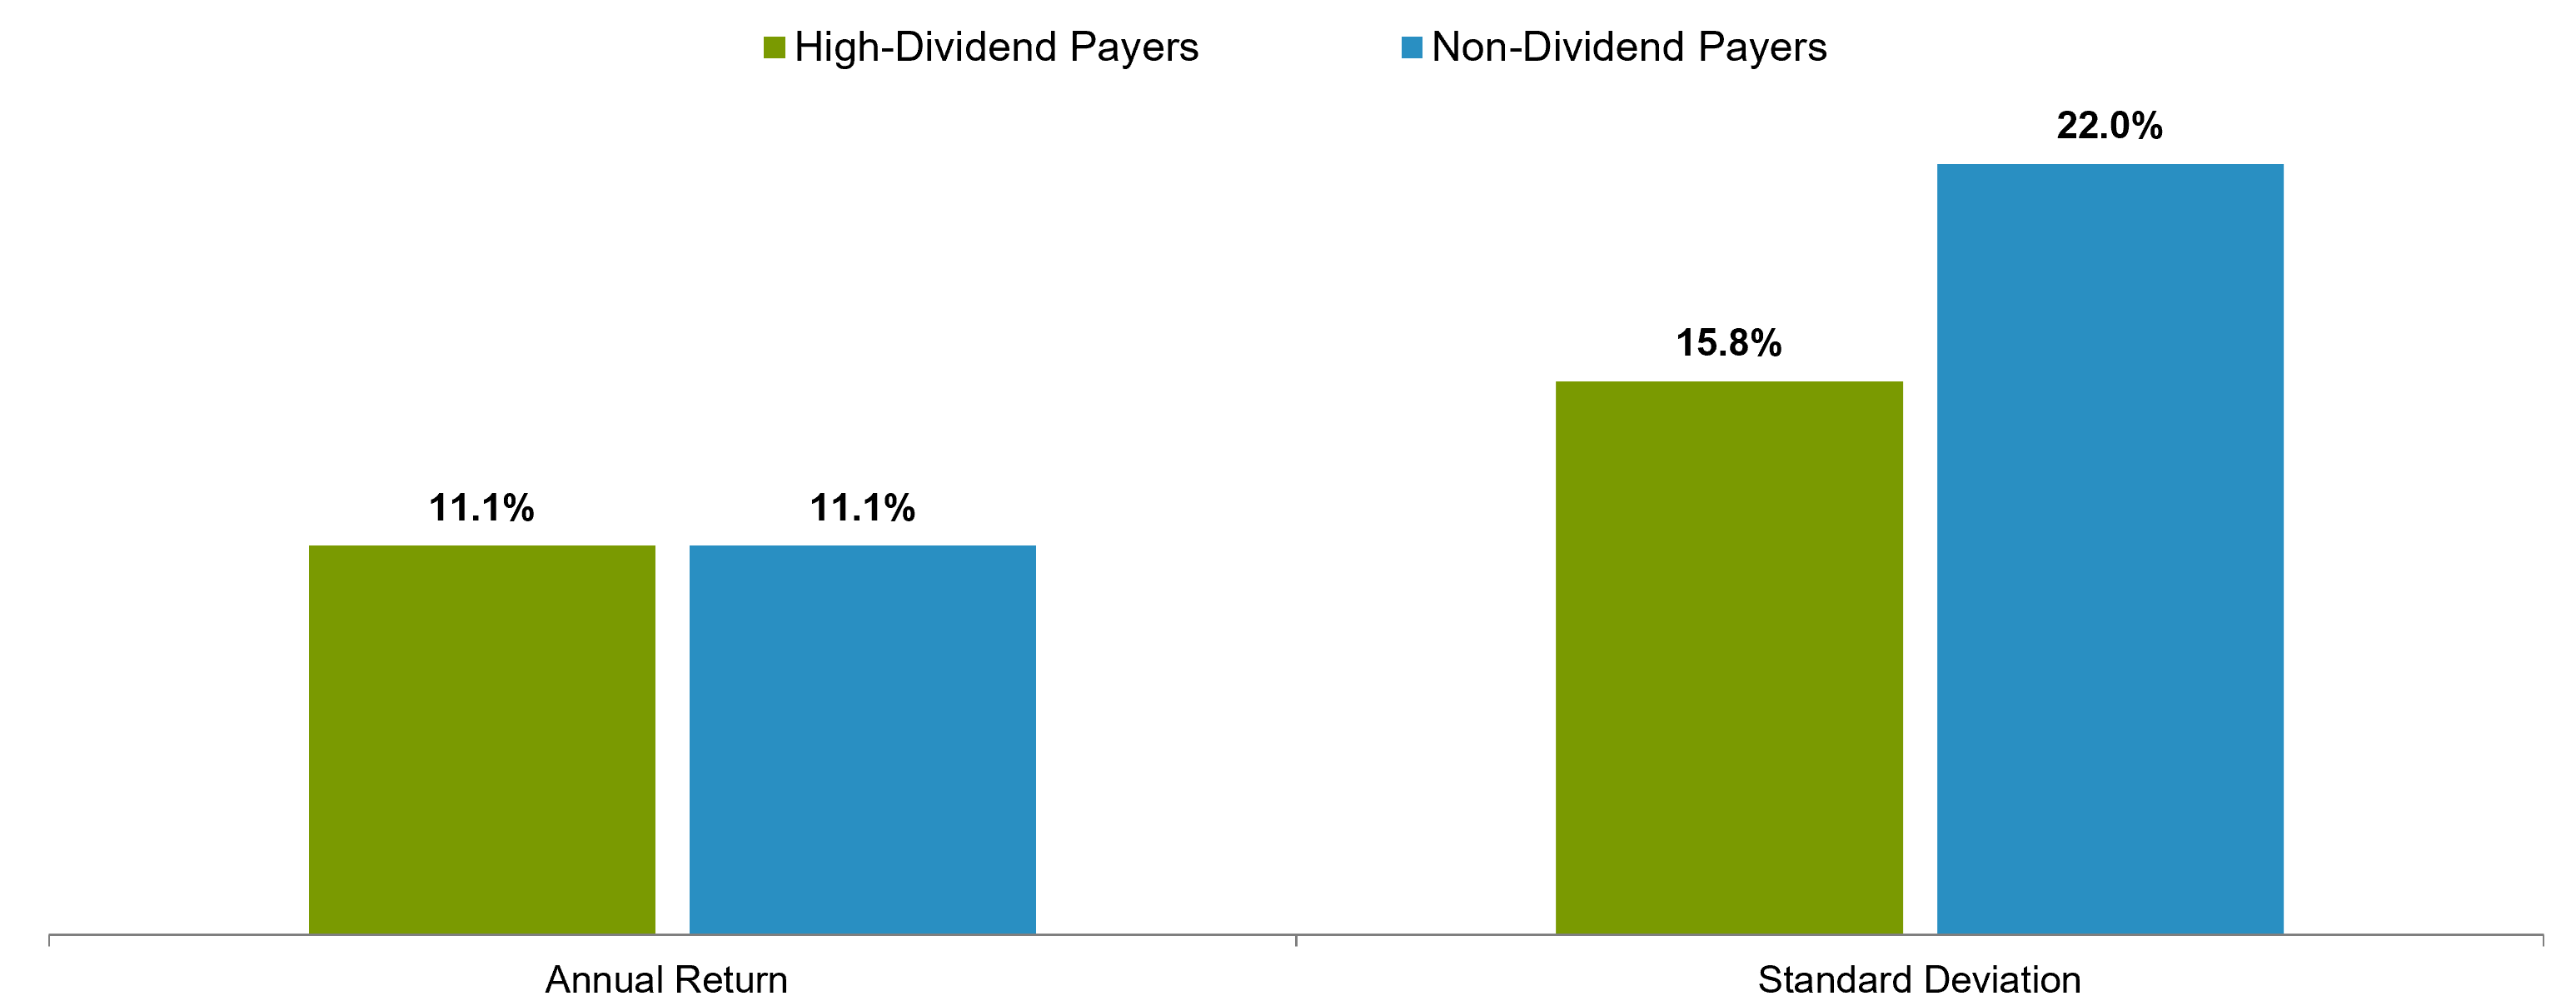 Bar chart shows a comparison of how two classifications of stocks —non-dividend-paying stocks and high dividend paying stocks — have performed between 11/1994 and 12/2022. Returns and Standard Deviation are shown for non-dividend-paying stocks and high dividend paying stocks. Non dividend paying stocks returned 11.1% and high-dividend paying stocks returned 11.1%. Standard Deviation for non-dividend paying stocks was 22% and standard deviation for high-dividend paying stocks was 15.8%.